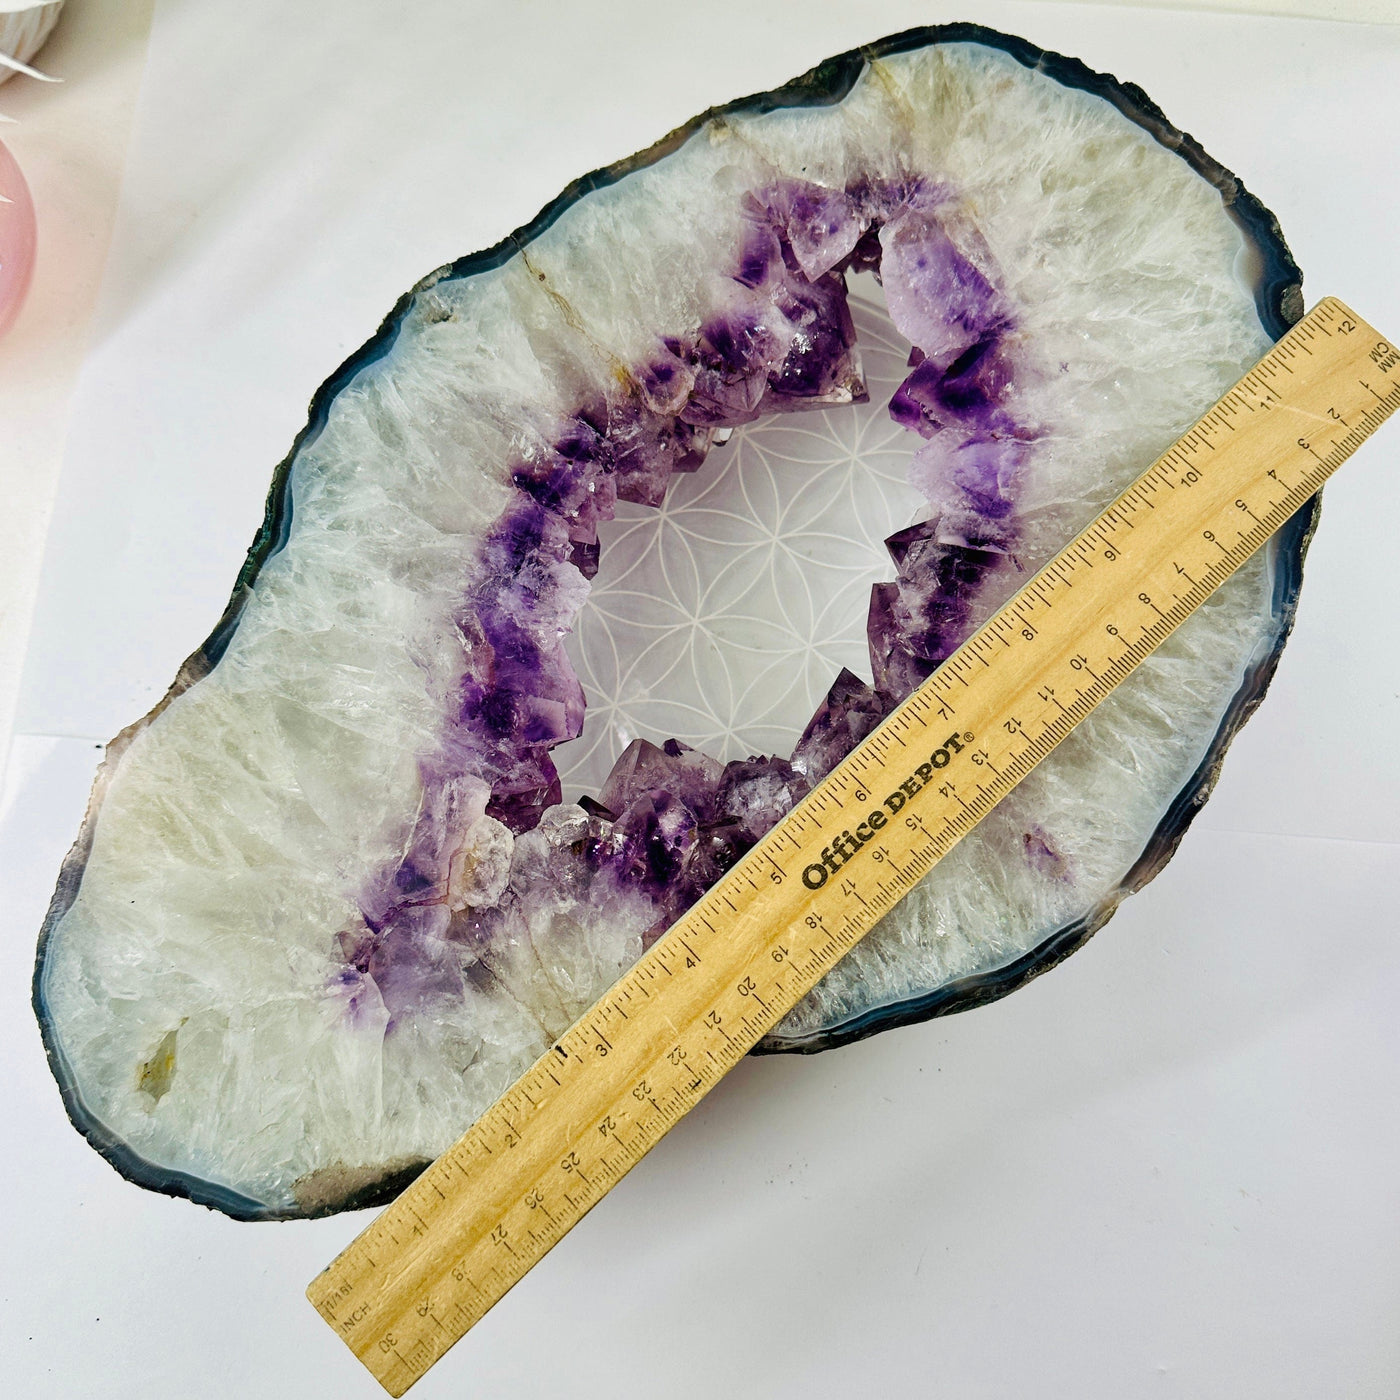 Amethyst Slice Crystal Portal - Large OOAK top view with ruler for size reference